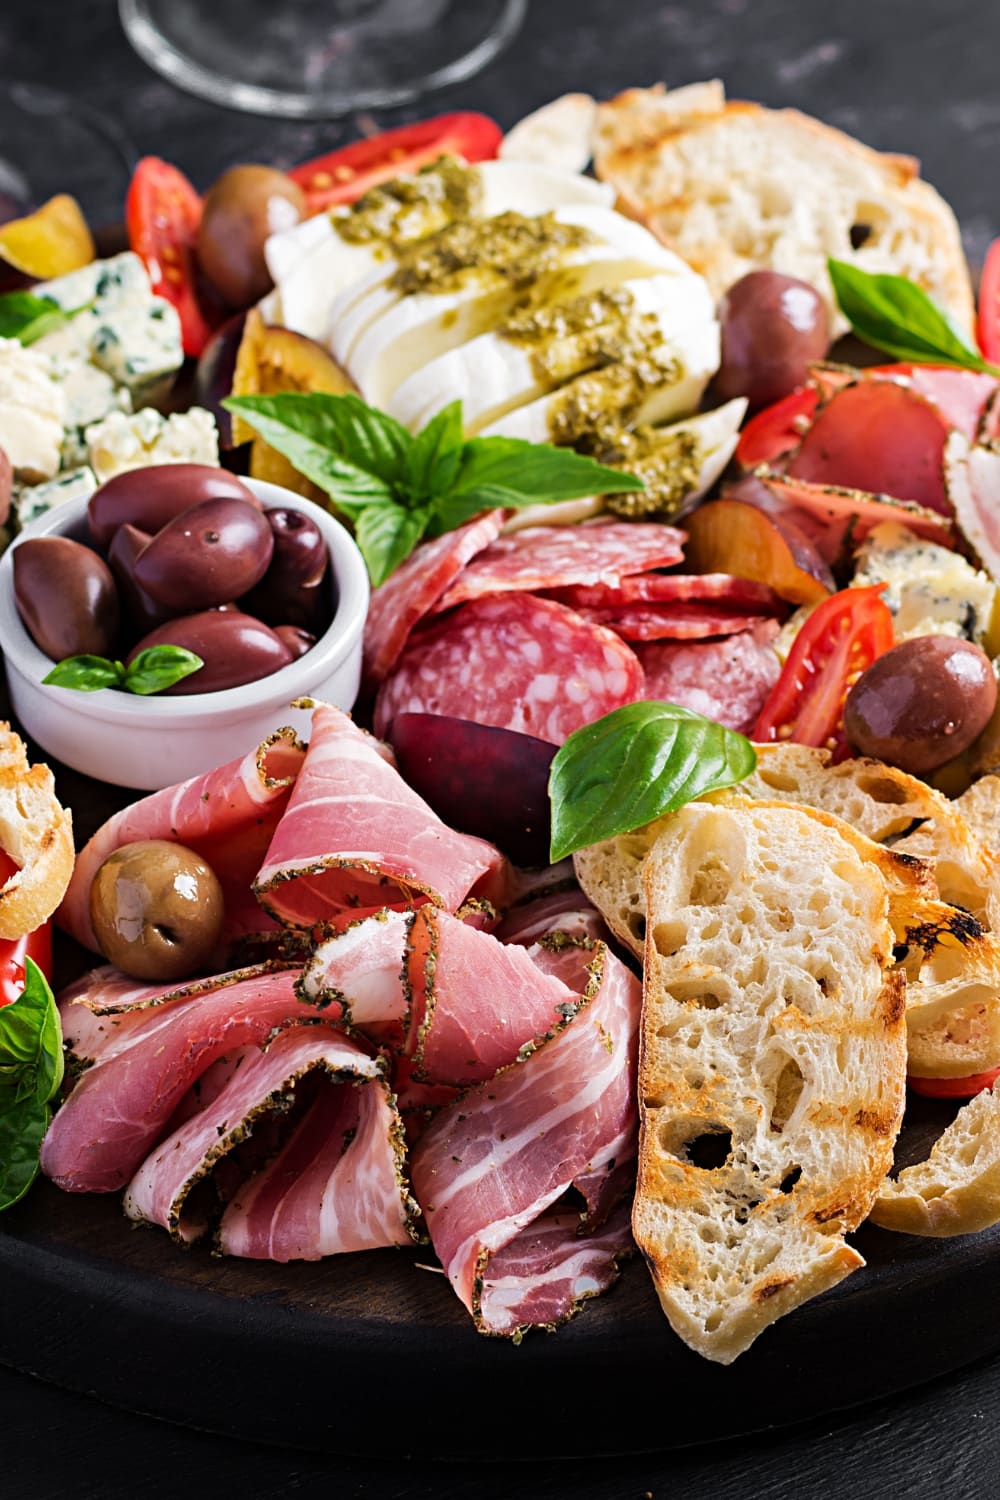 Antipasto Platter with Ham, Prosciutto, Olives, Bread, Tomatoes,  and Cheese